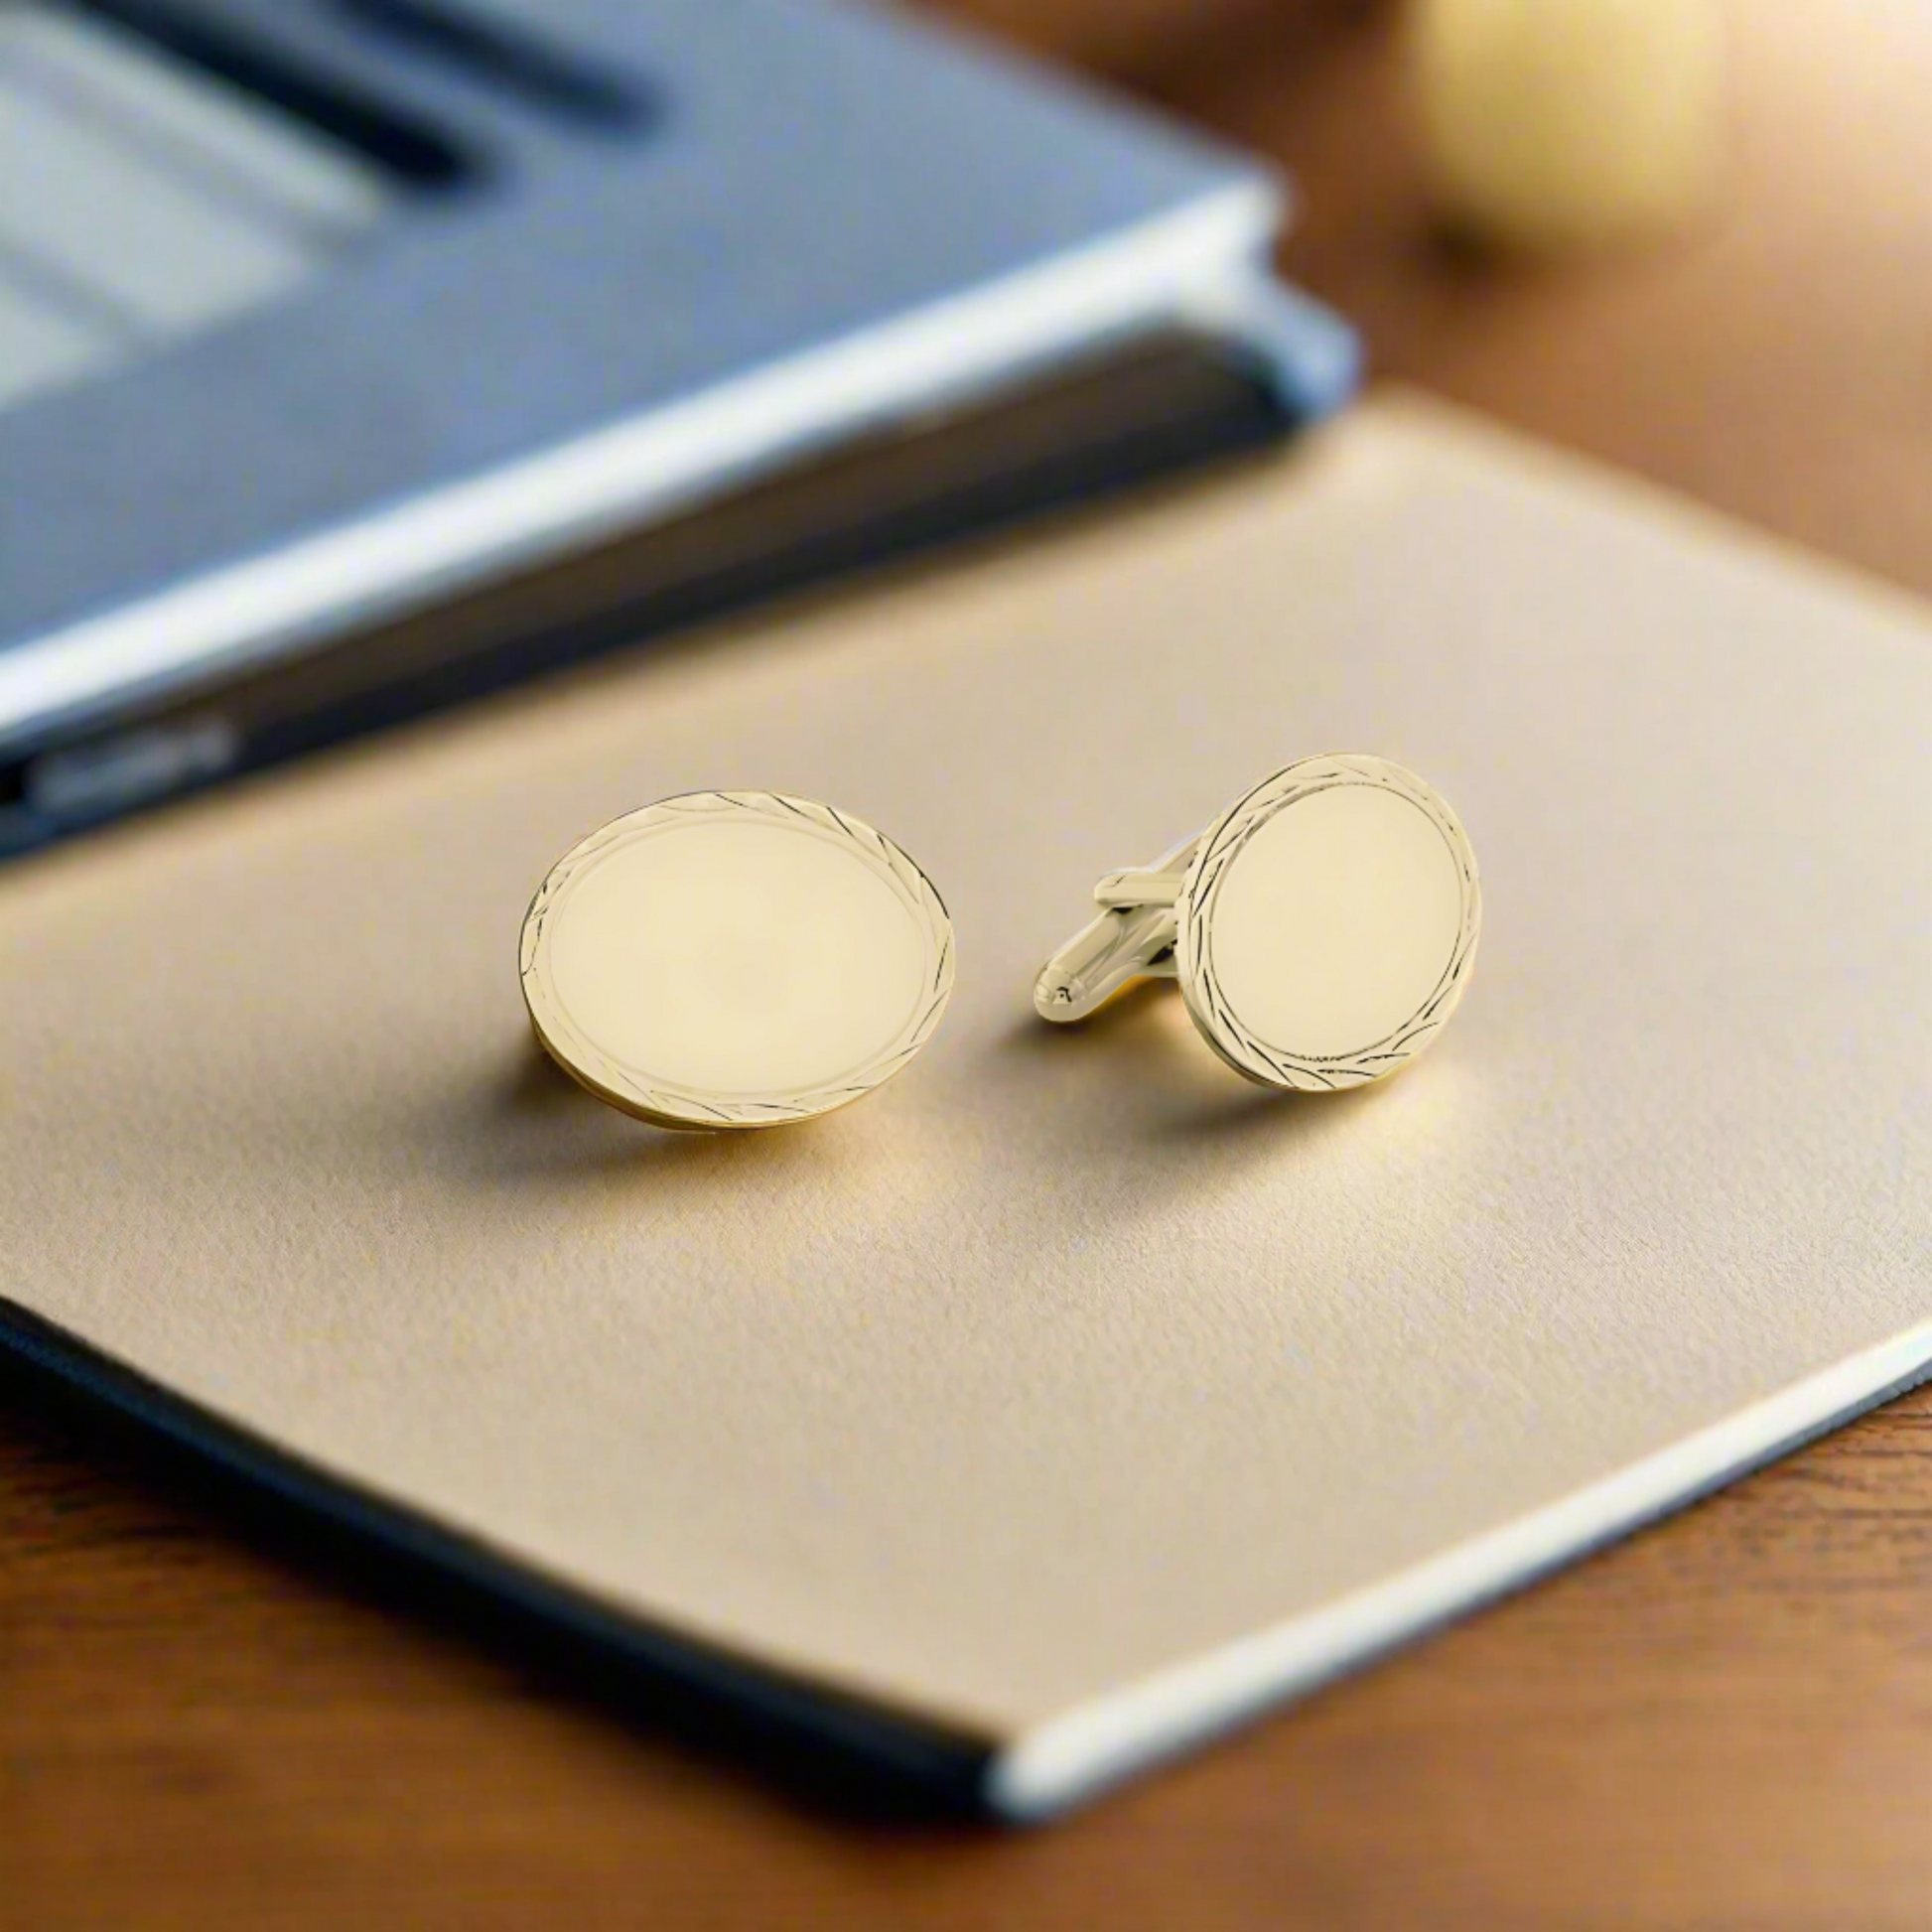 Vermeil Oval Cufflinks with Feathered Edge